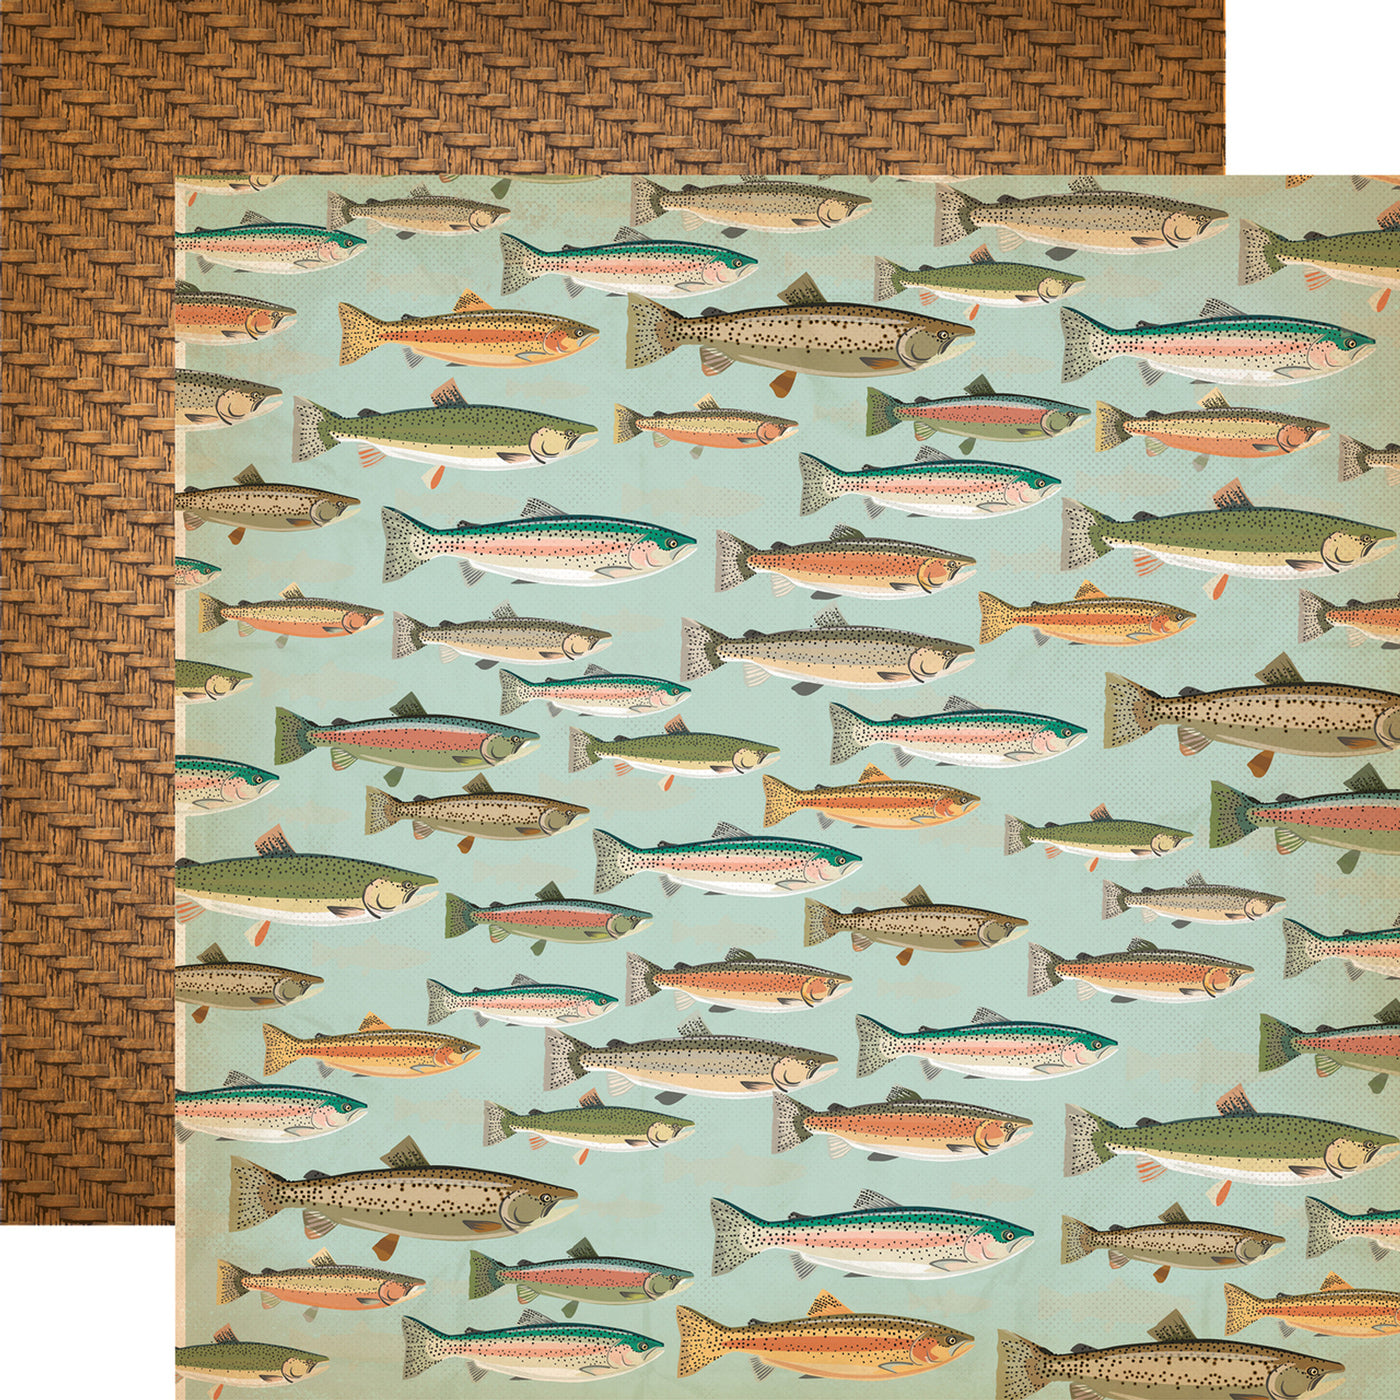 12x12 cardstock. (multiple sizes and colors of trout and other related fish on a blue background with brown basket weave pattern reverse)